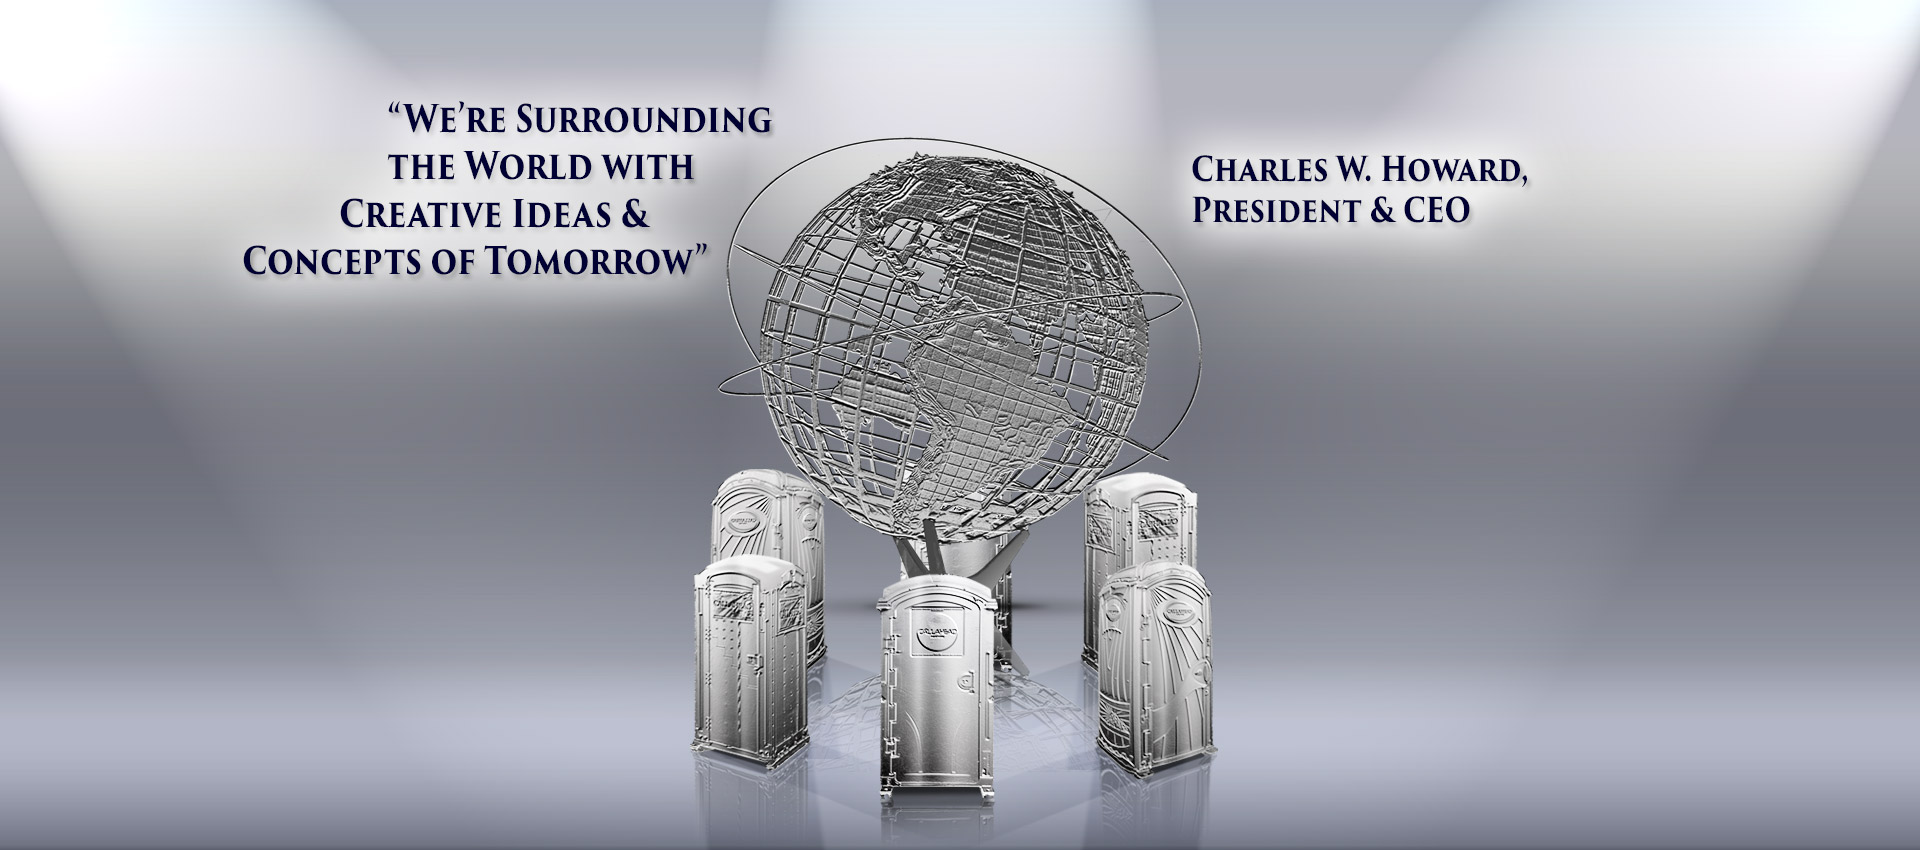 "We Are Surrounding The World With Creative Ideas & Concepts of Tomorrow" - Charles W. Howard, President & CEO